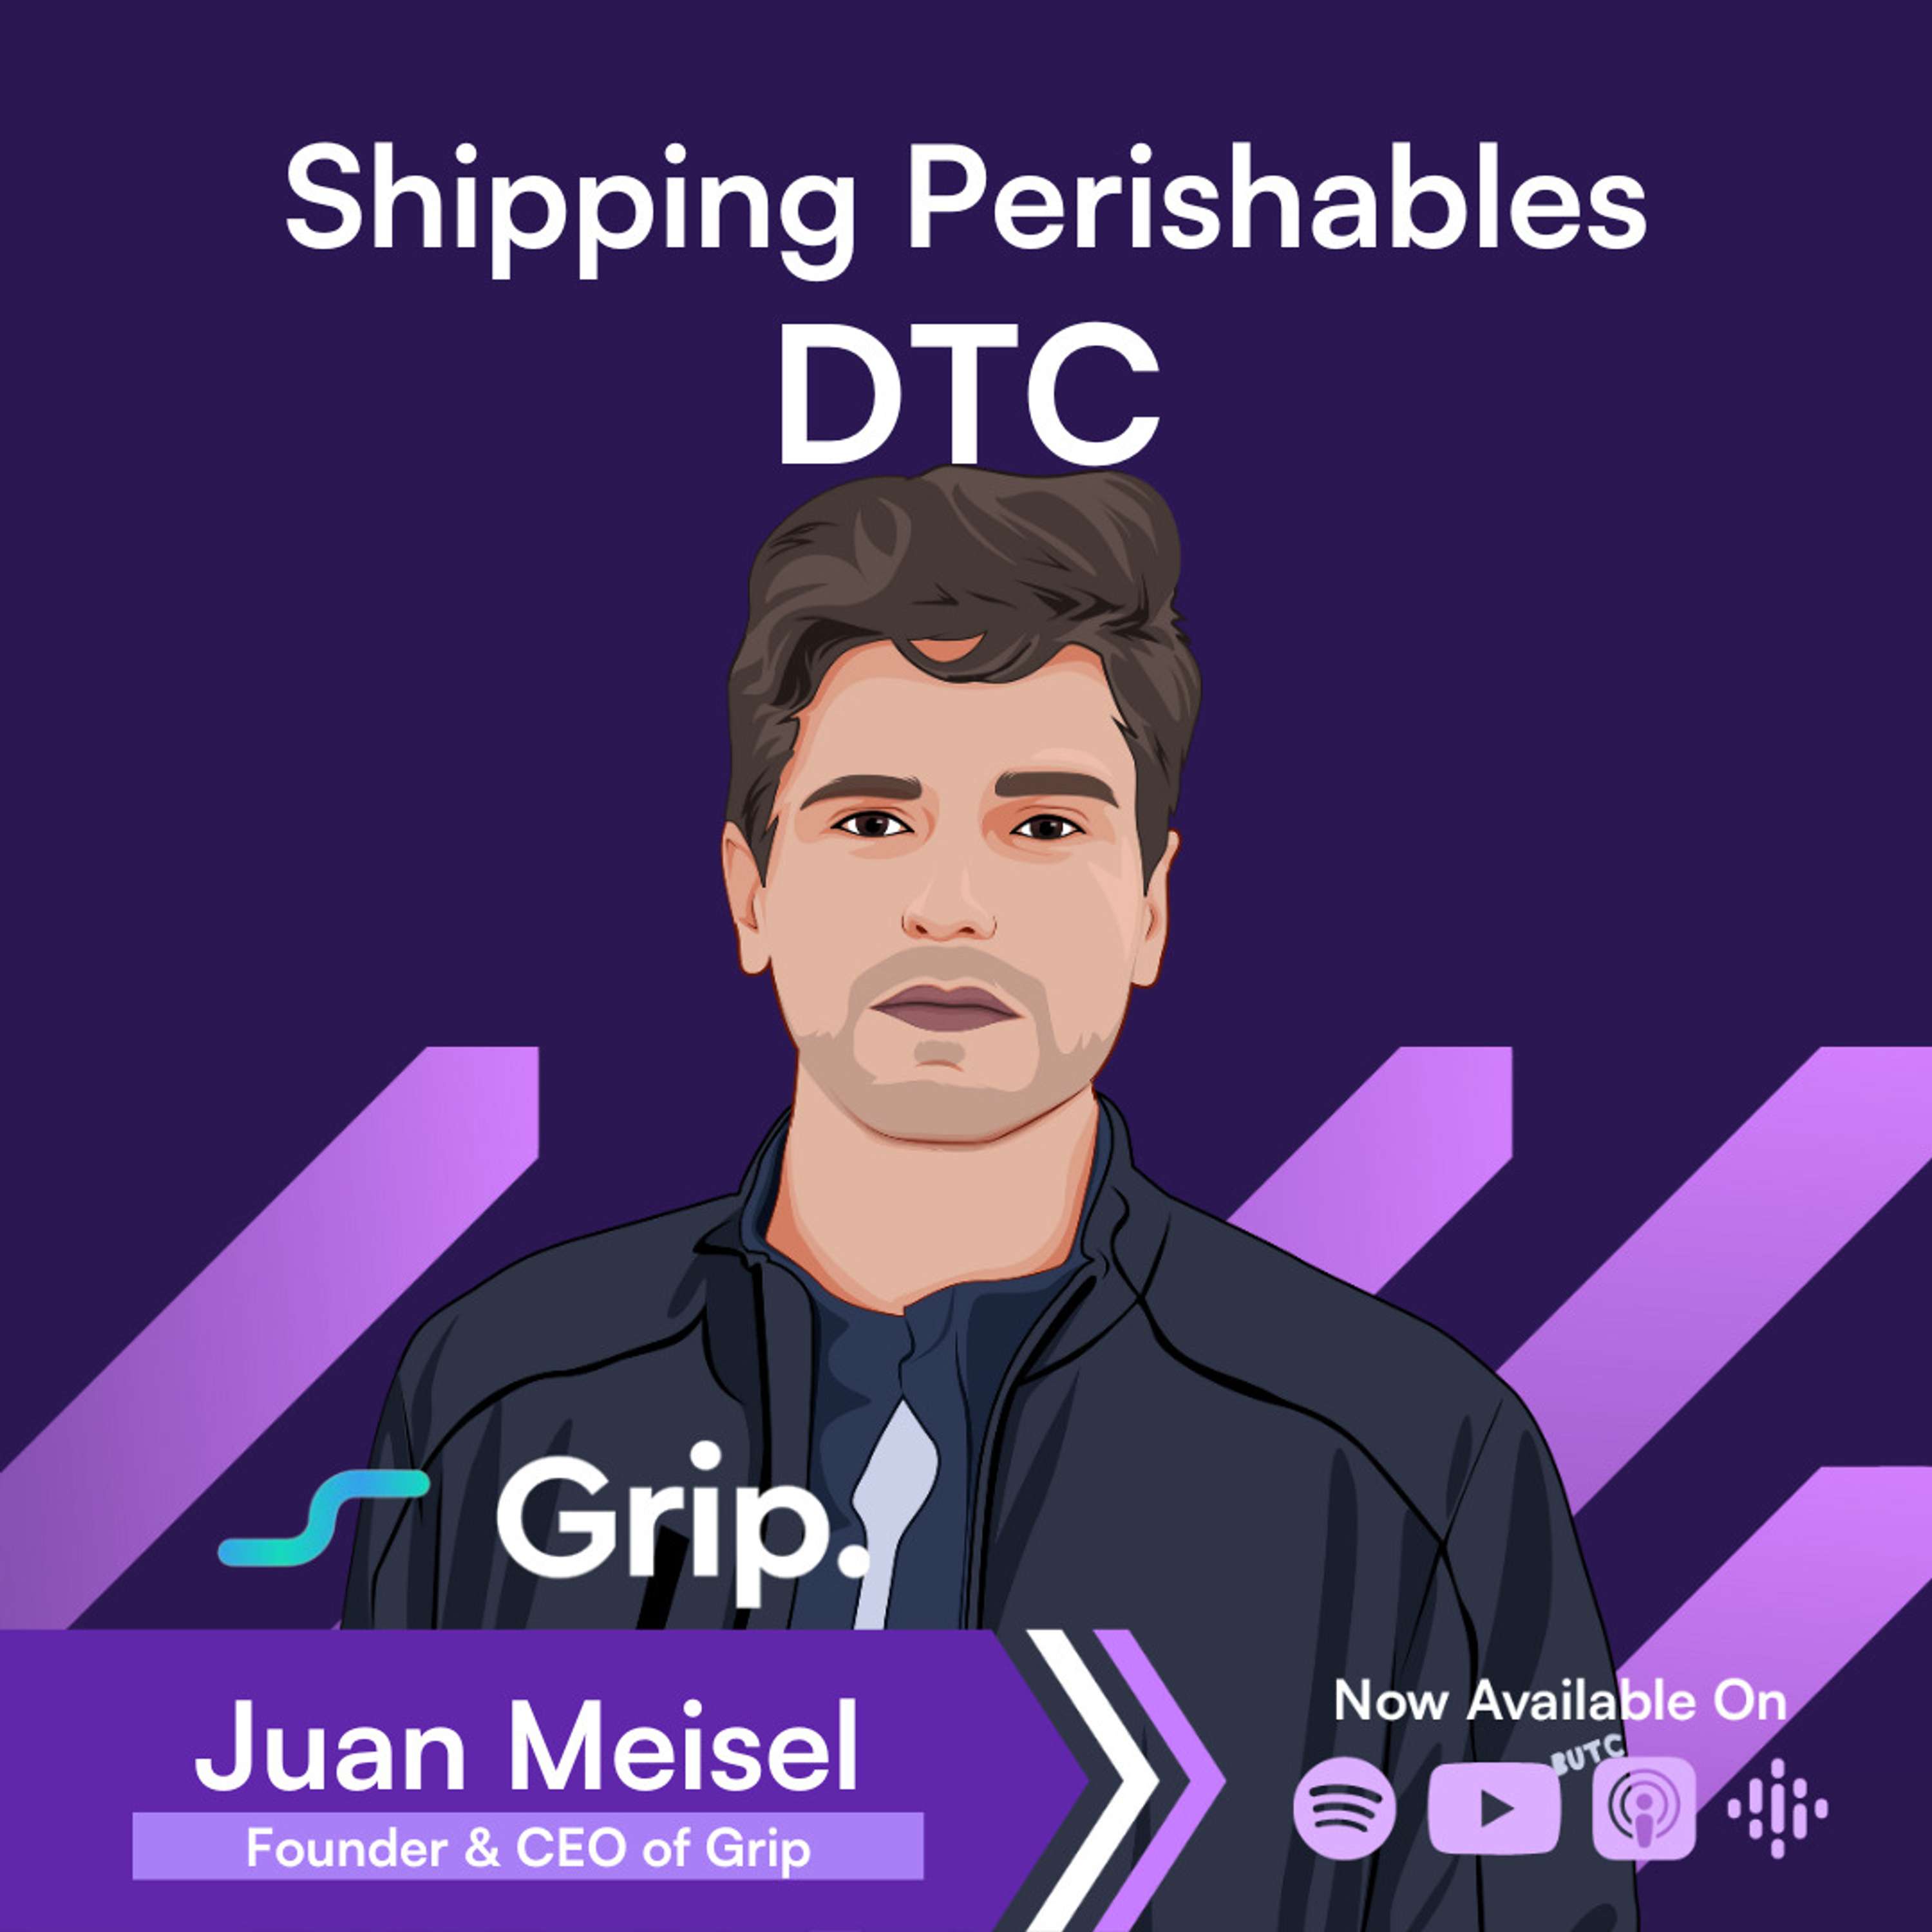 How Grip has Safely Shipped $1B worth of Perishables for DTC Brands → Juan Meisel